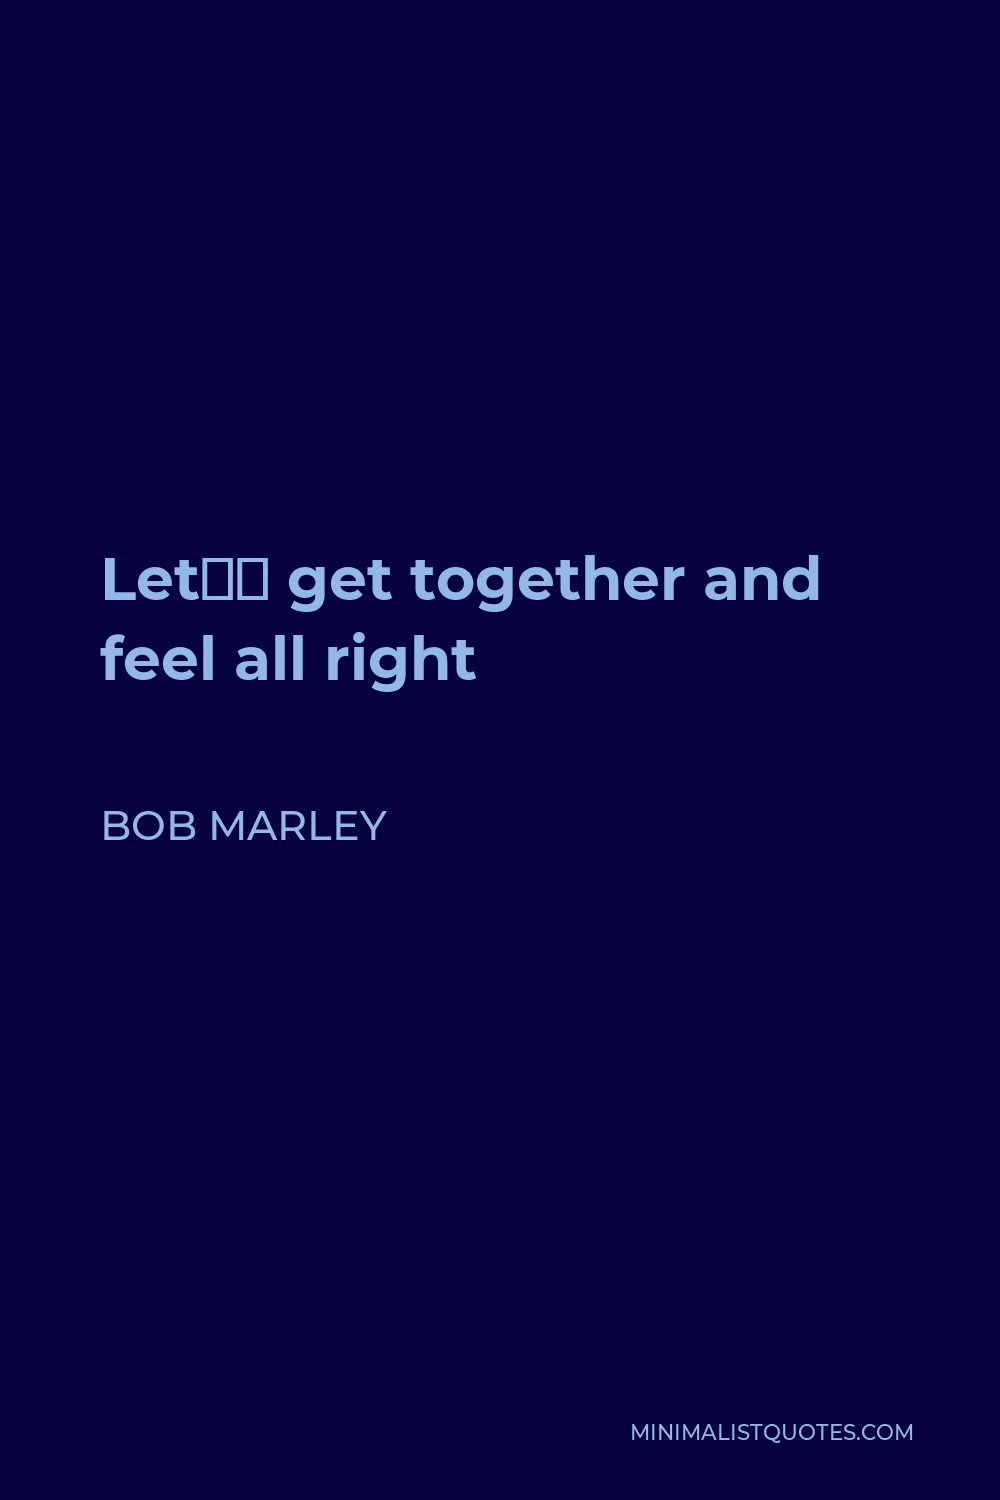 Bob Marley Quote - Let’s get together and feel all right